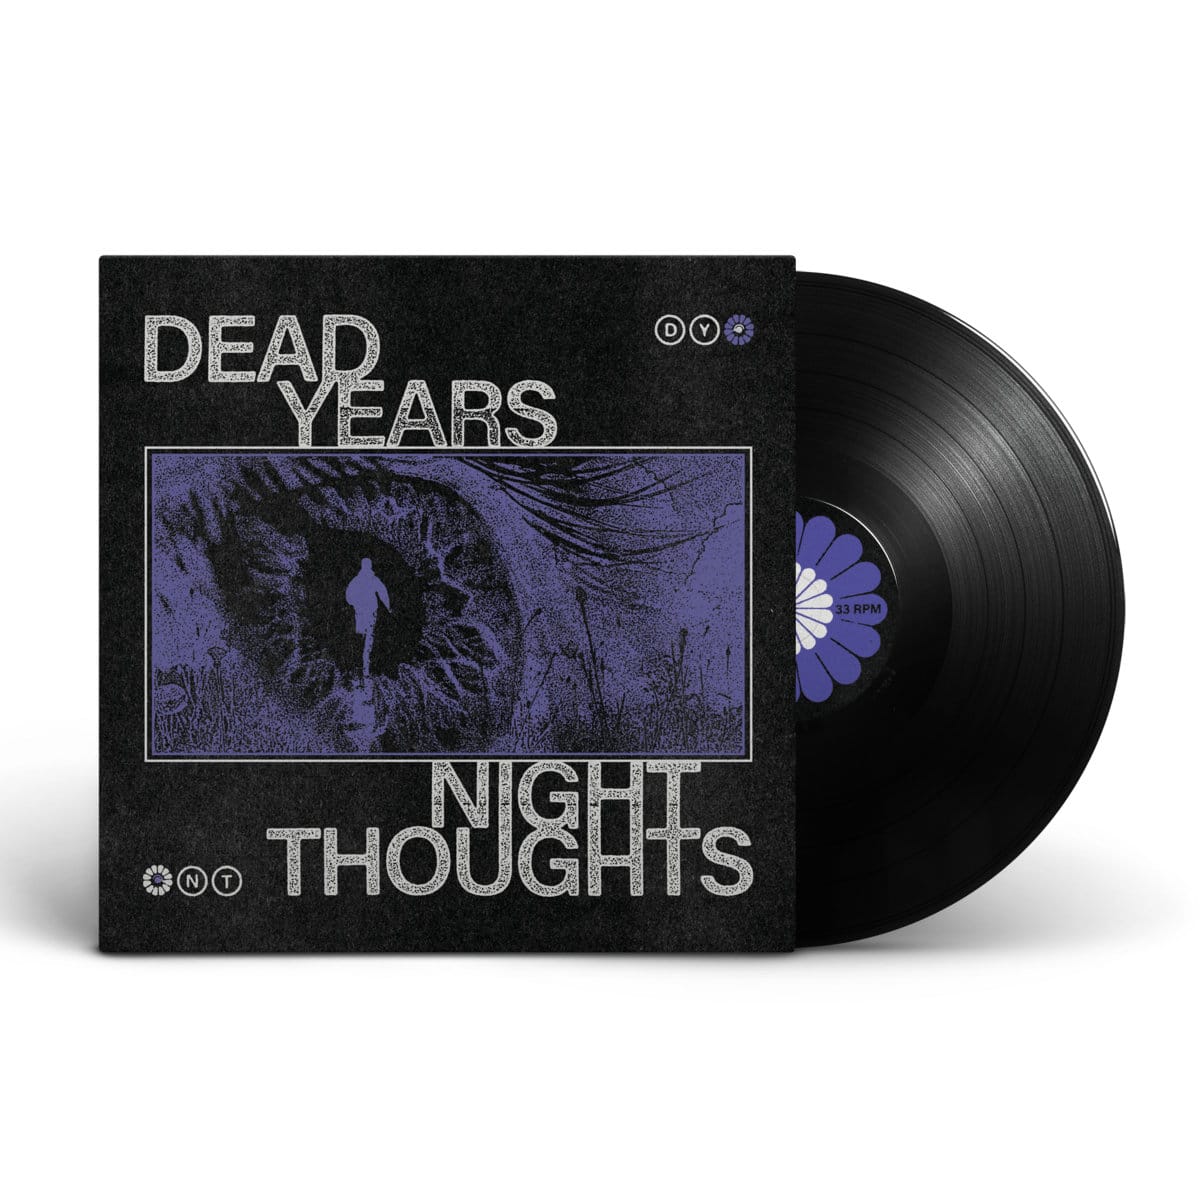 Dead Years – Night Thoughts LP (Dirt Cult) DEAD YEARS play dark post-punk with a distinct 80s influence. The trio from Bielefeld, Germany, consists of Julia, Hannes and Jonas, who all played in other bands (Gloom Sleeper, Pointed, Ruins, Mayak, Shoyu Squad) before combining their talents in DEAD YEARS and releasing a successful debut album in 2022.